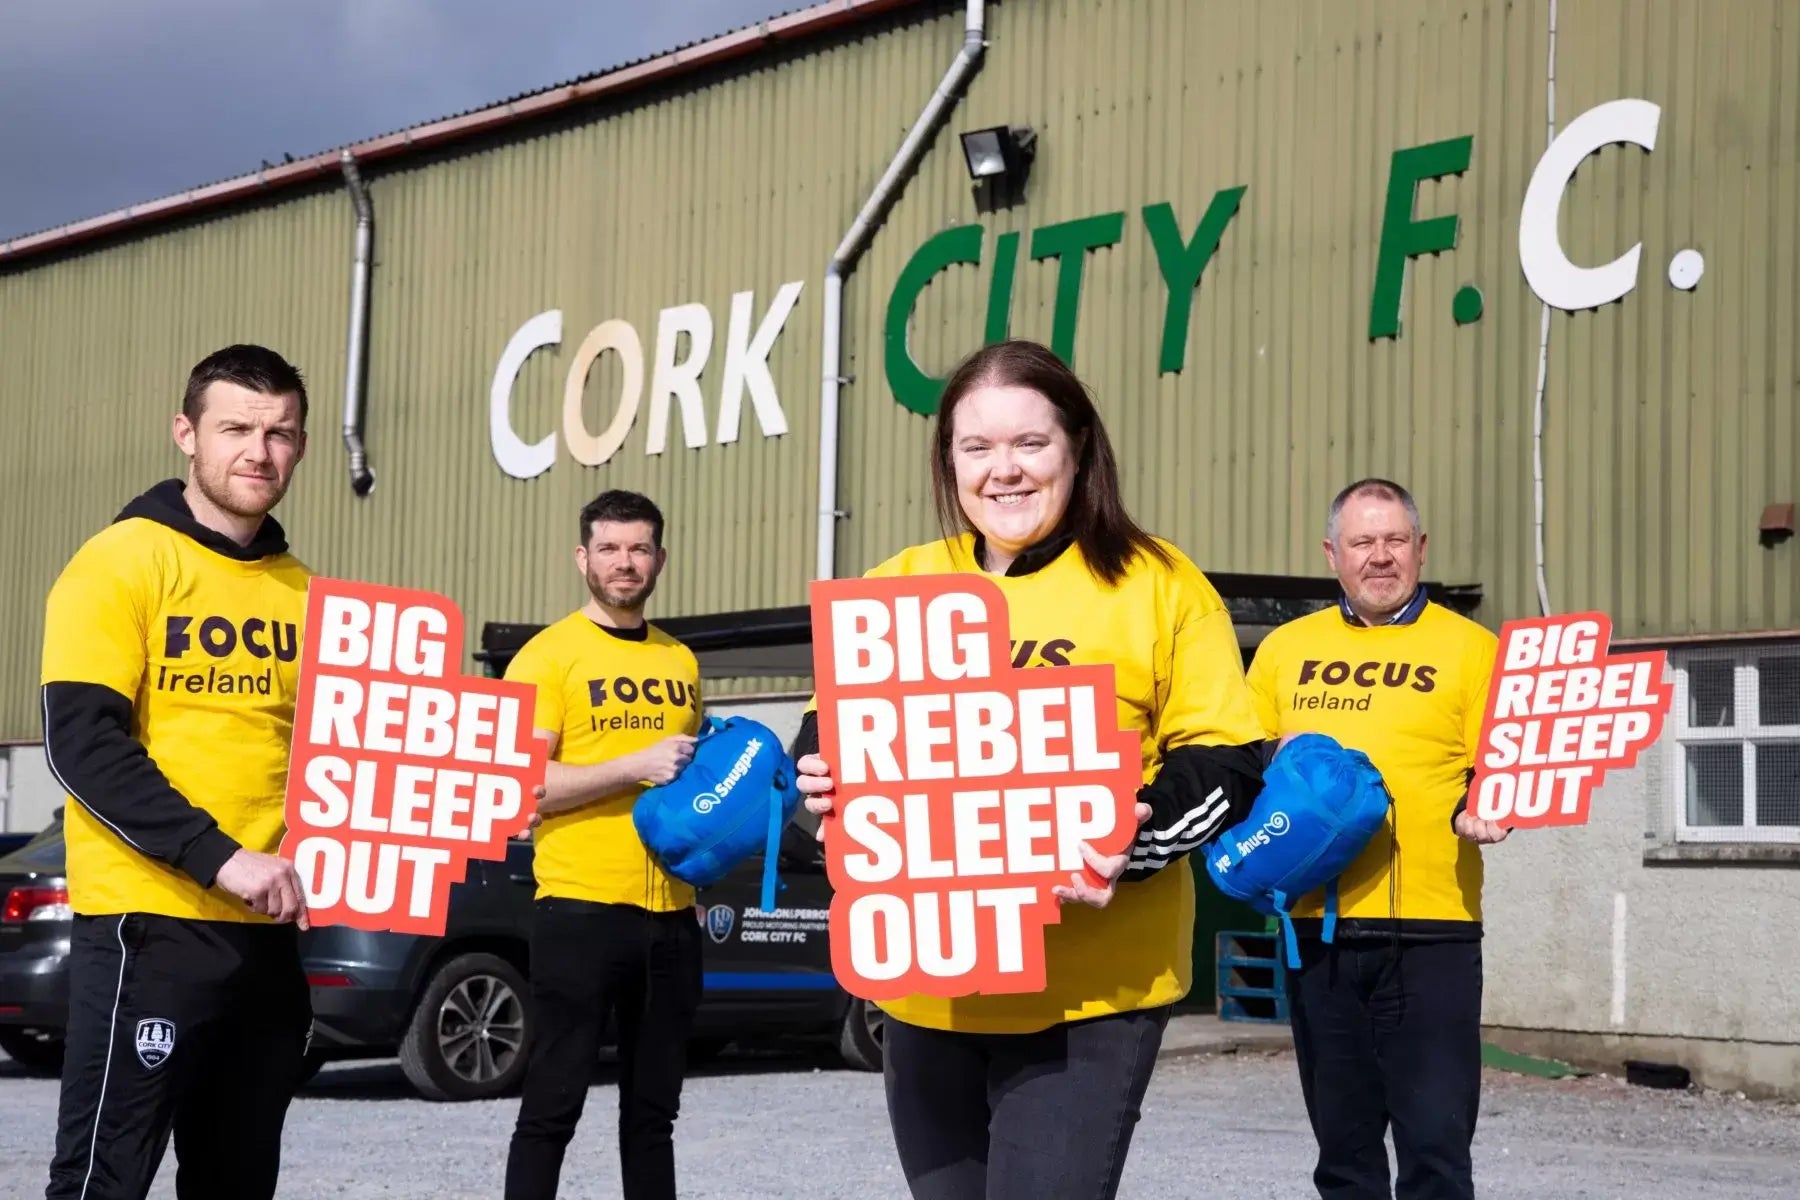 Simulated Big Rebel Sleep Out on Saturday, 24 April!